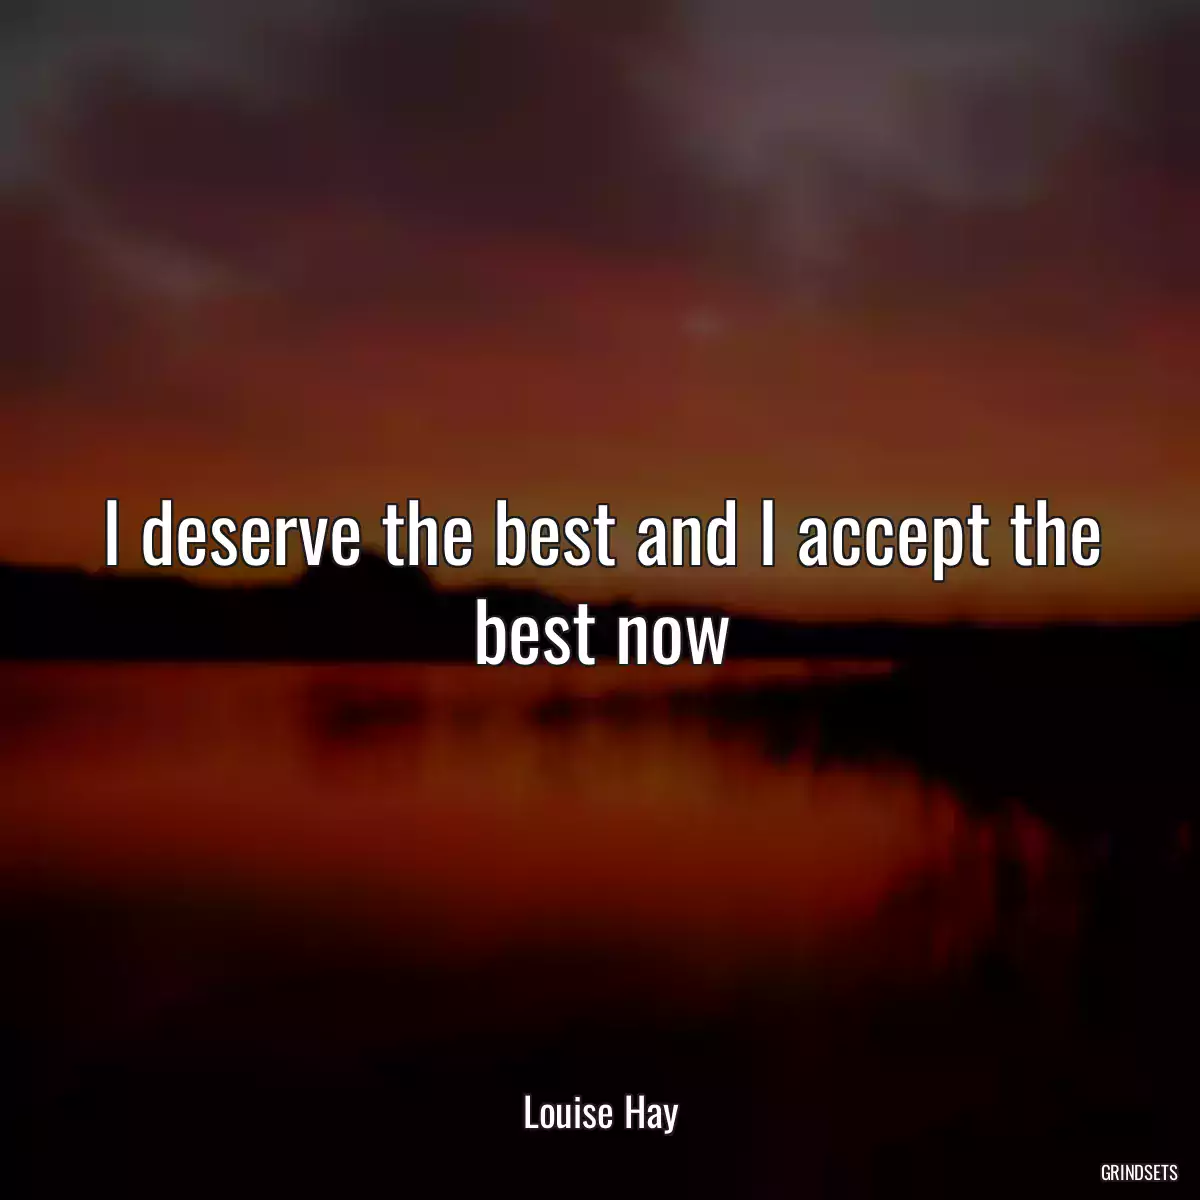 I deserve the best and I accept the best now